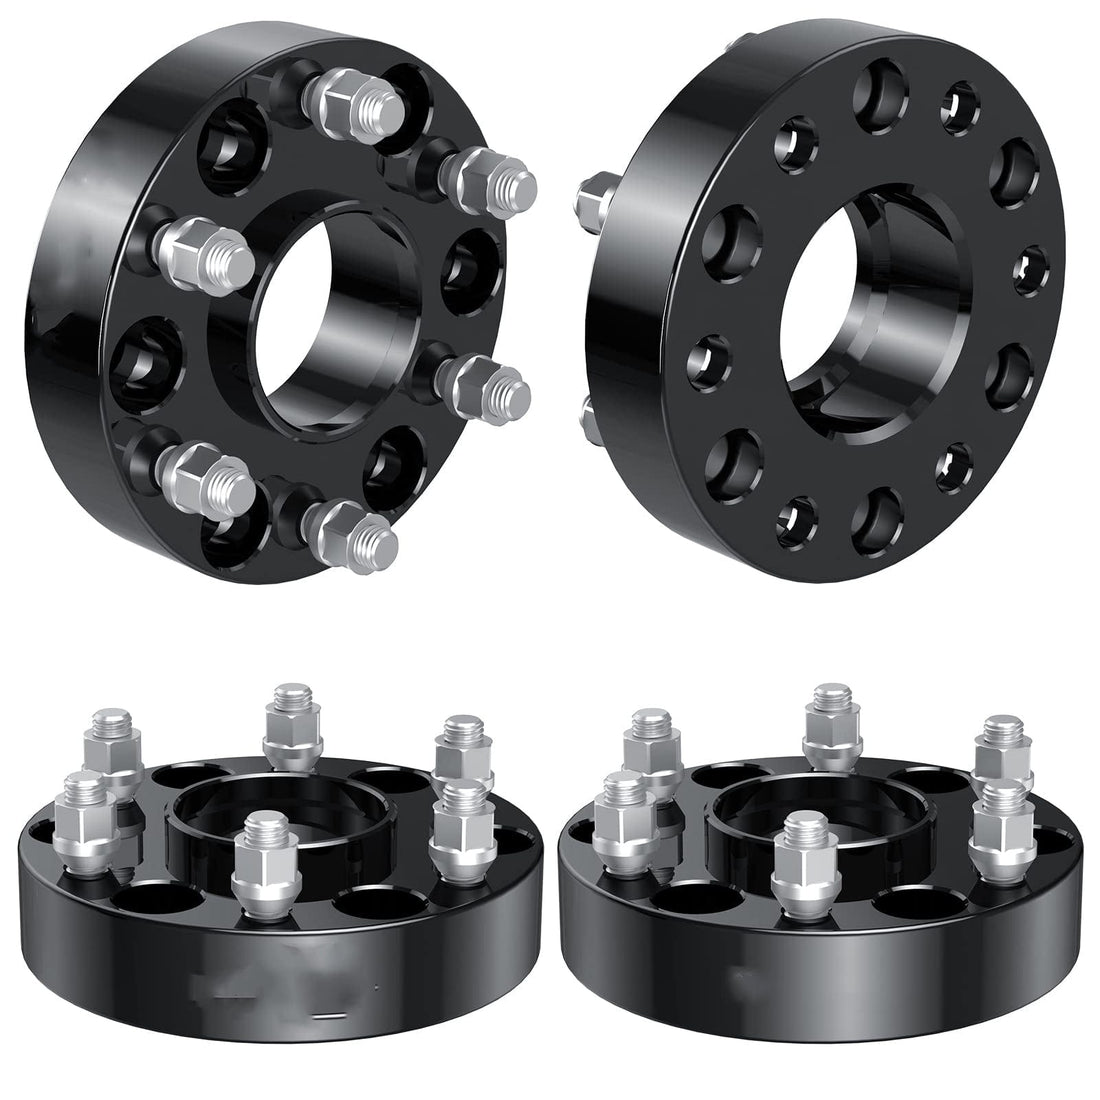 GARVEE 5x5.5 Wheel Spacers Compatible with 2002-2011 Ram 1500, 2" Forged Hub Centric 9/16"x18 Stud Hub Bore 77.8mm